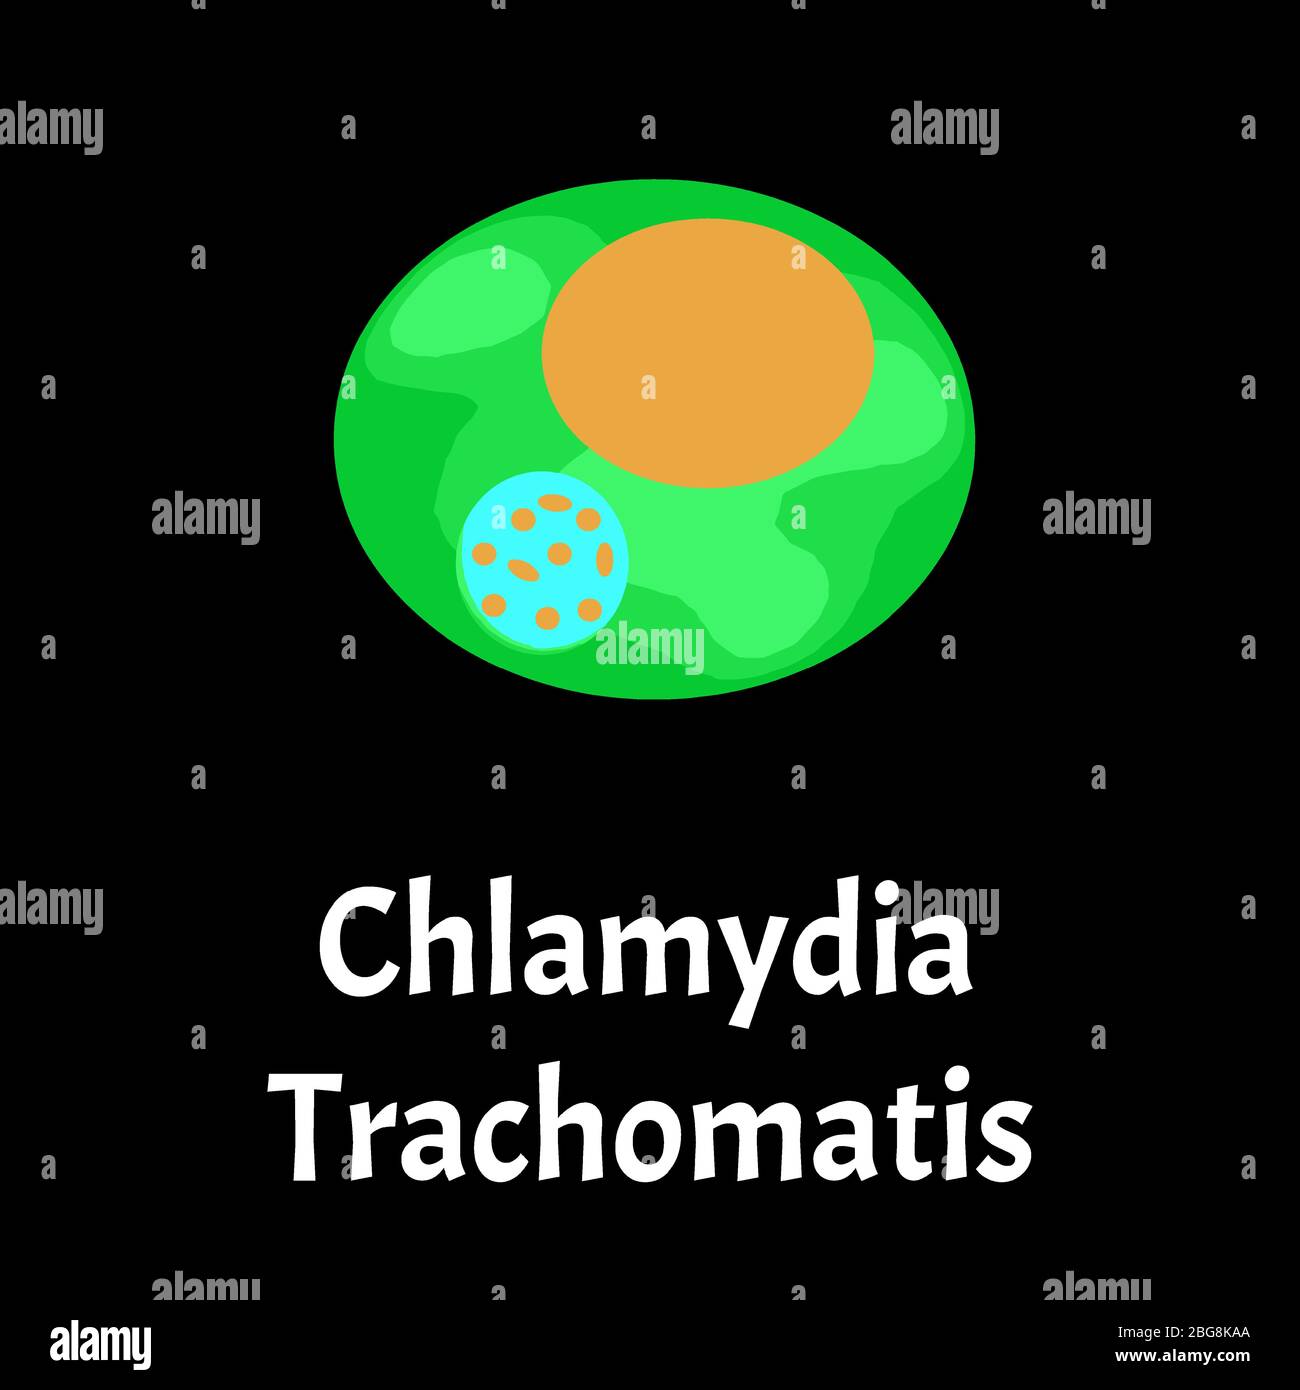 Chlamydia Trachomatis Bacterial Infections Chlamydiosis Sexually Transmitted Diseases 8977